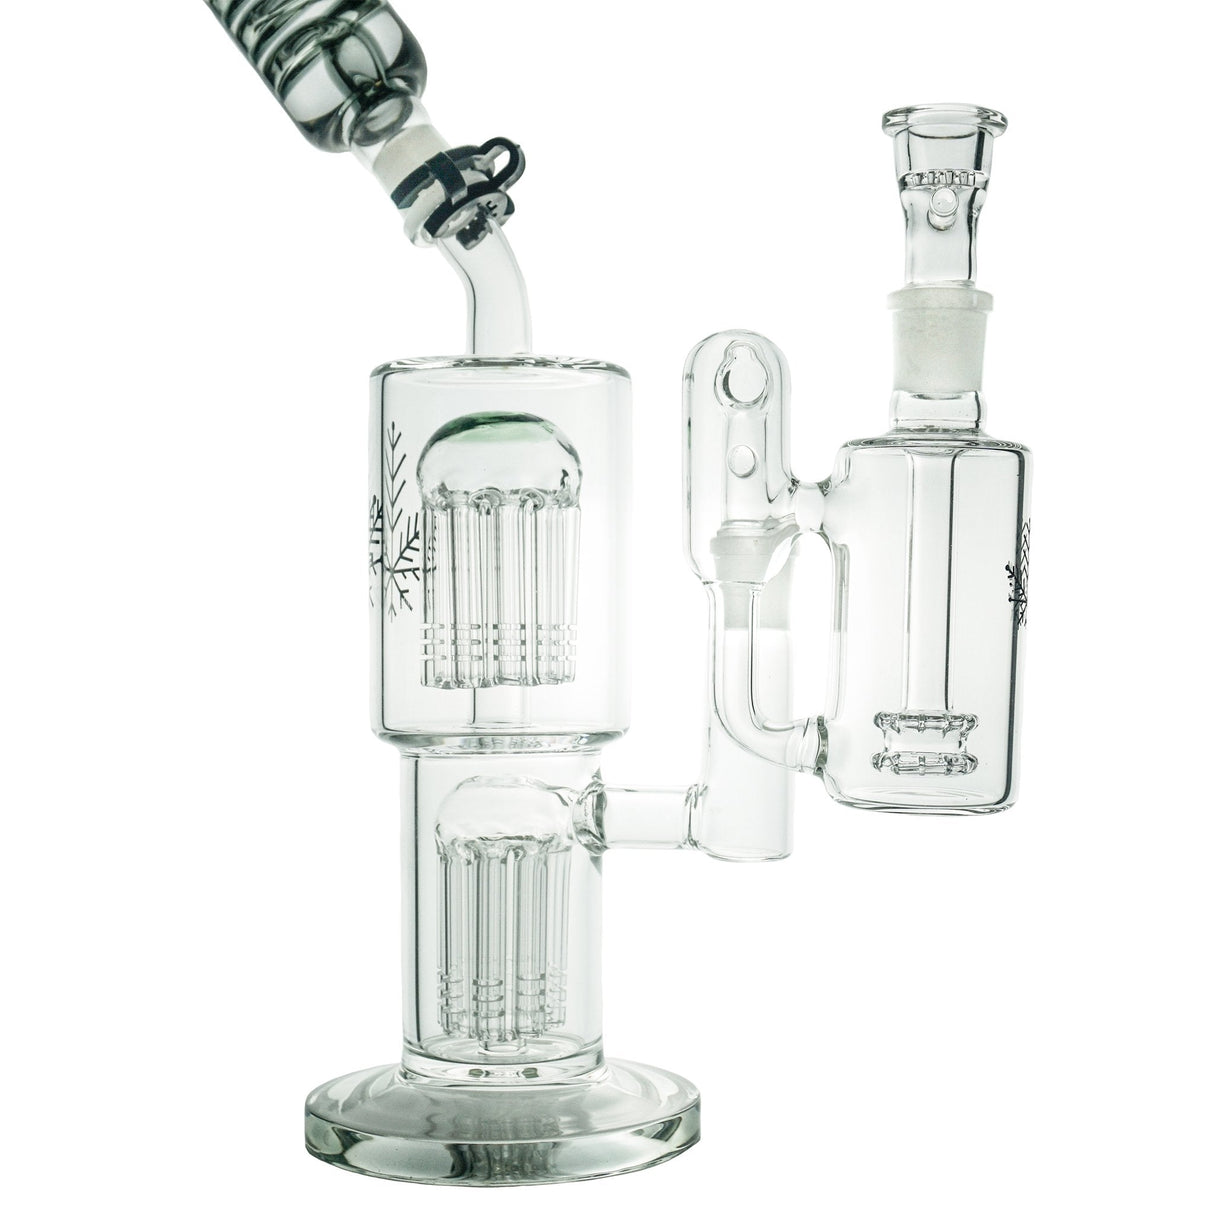 Freeze Pipe Ash Catcher for bongs, clear glass, 14mm & 18mm joint sizes, side view on white background